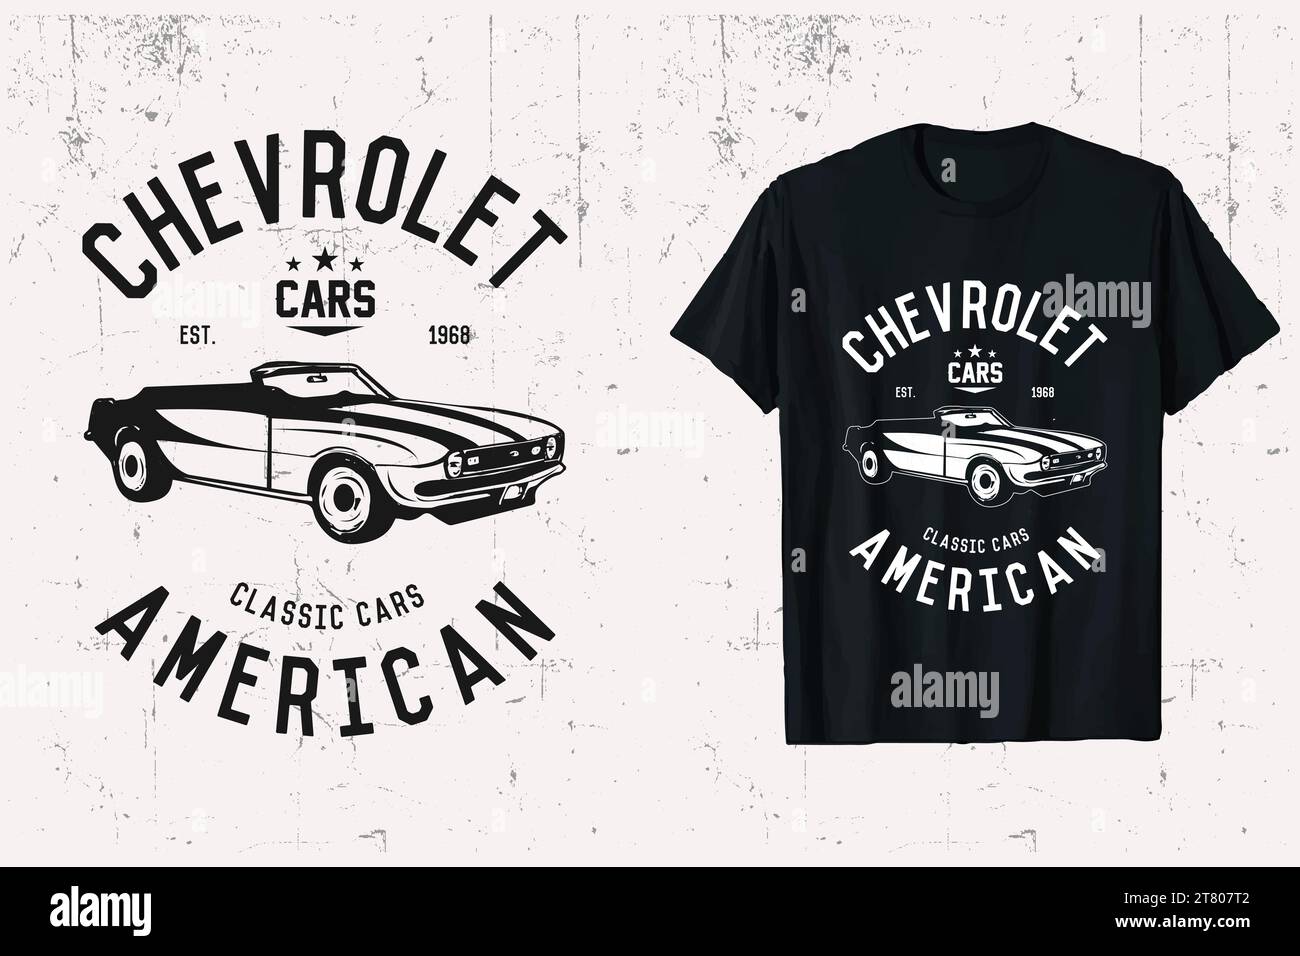 American Chevrolet Classic car Vector T-shirt Design. black and white prints t-shirt graphic. Stock Vector